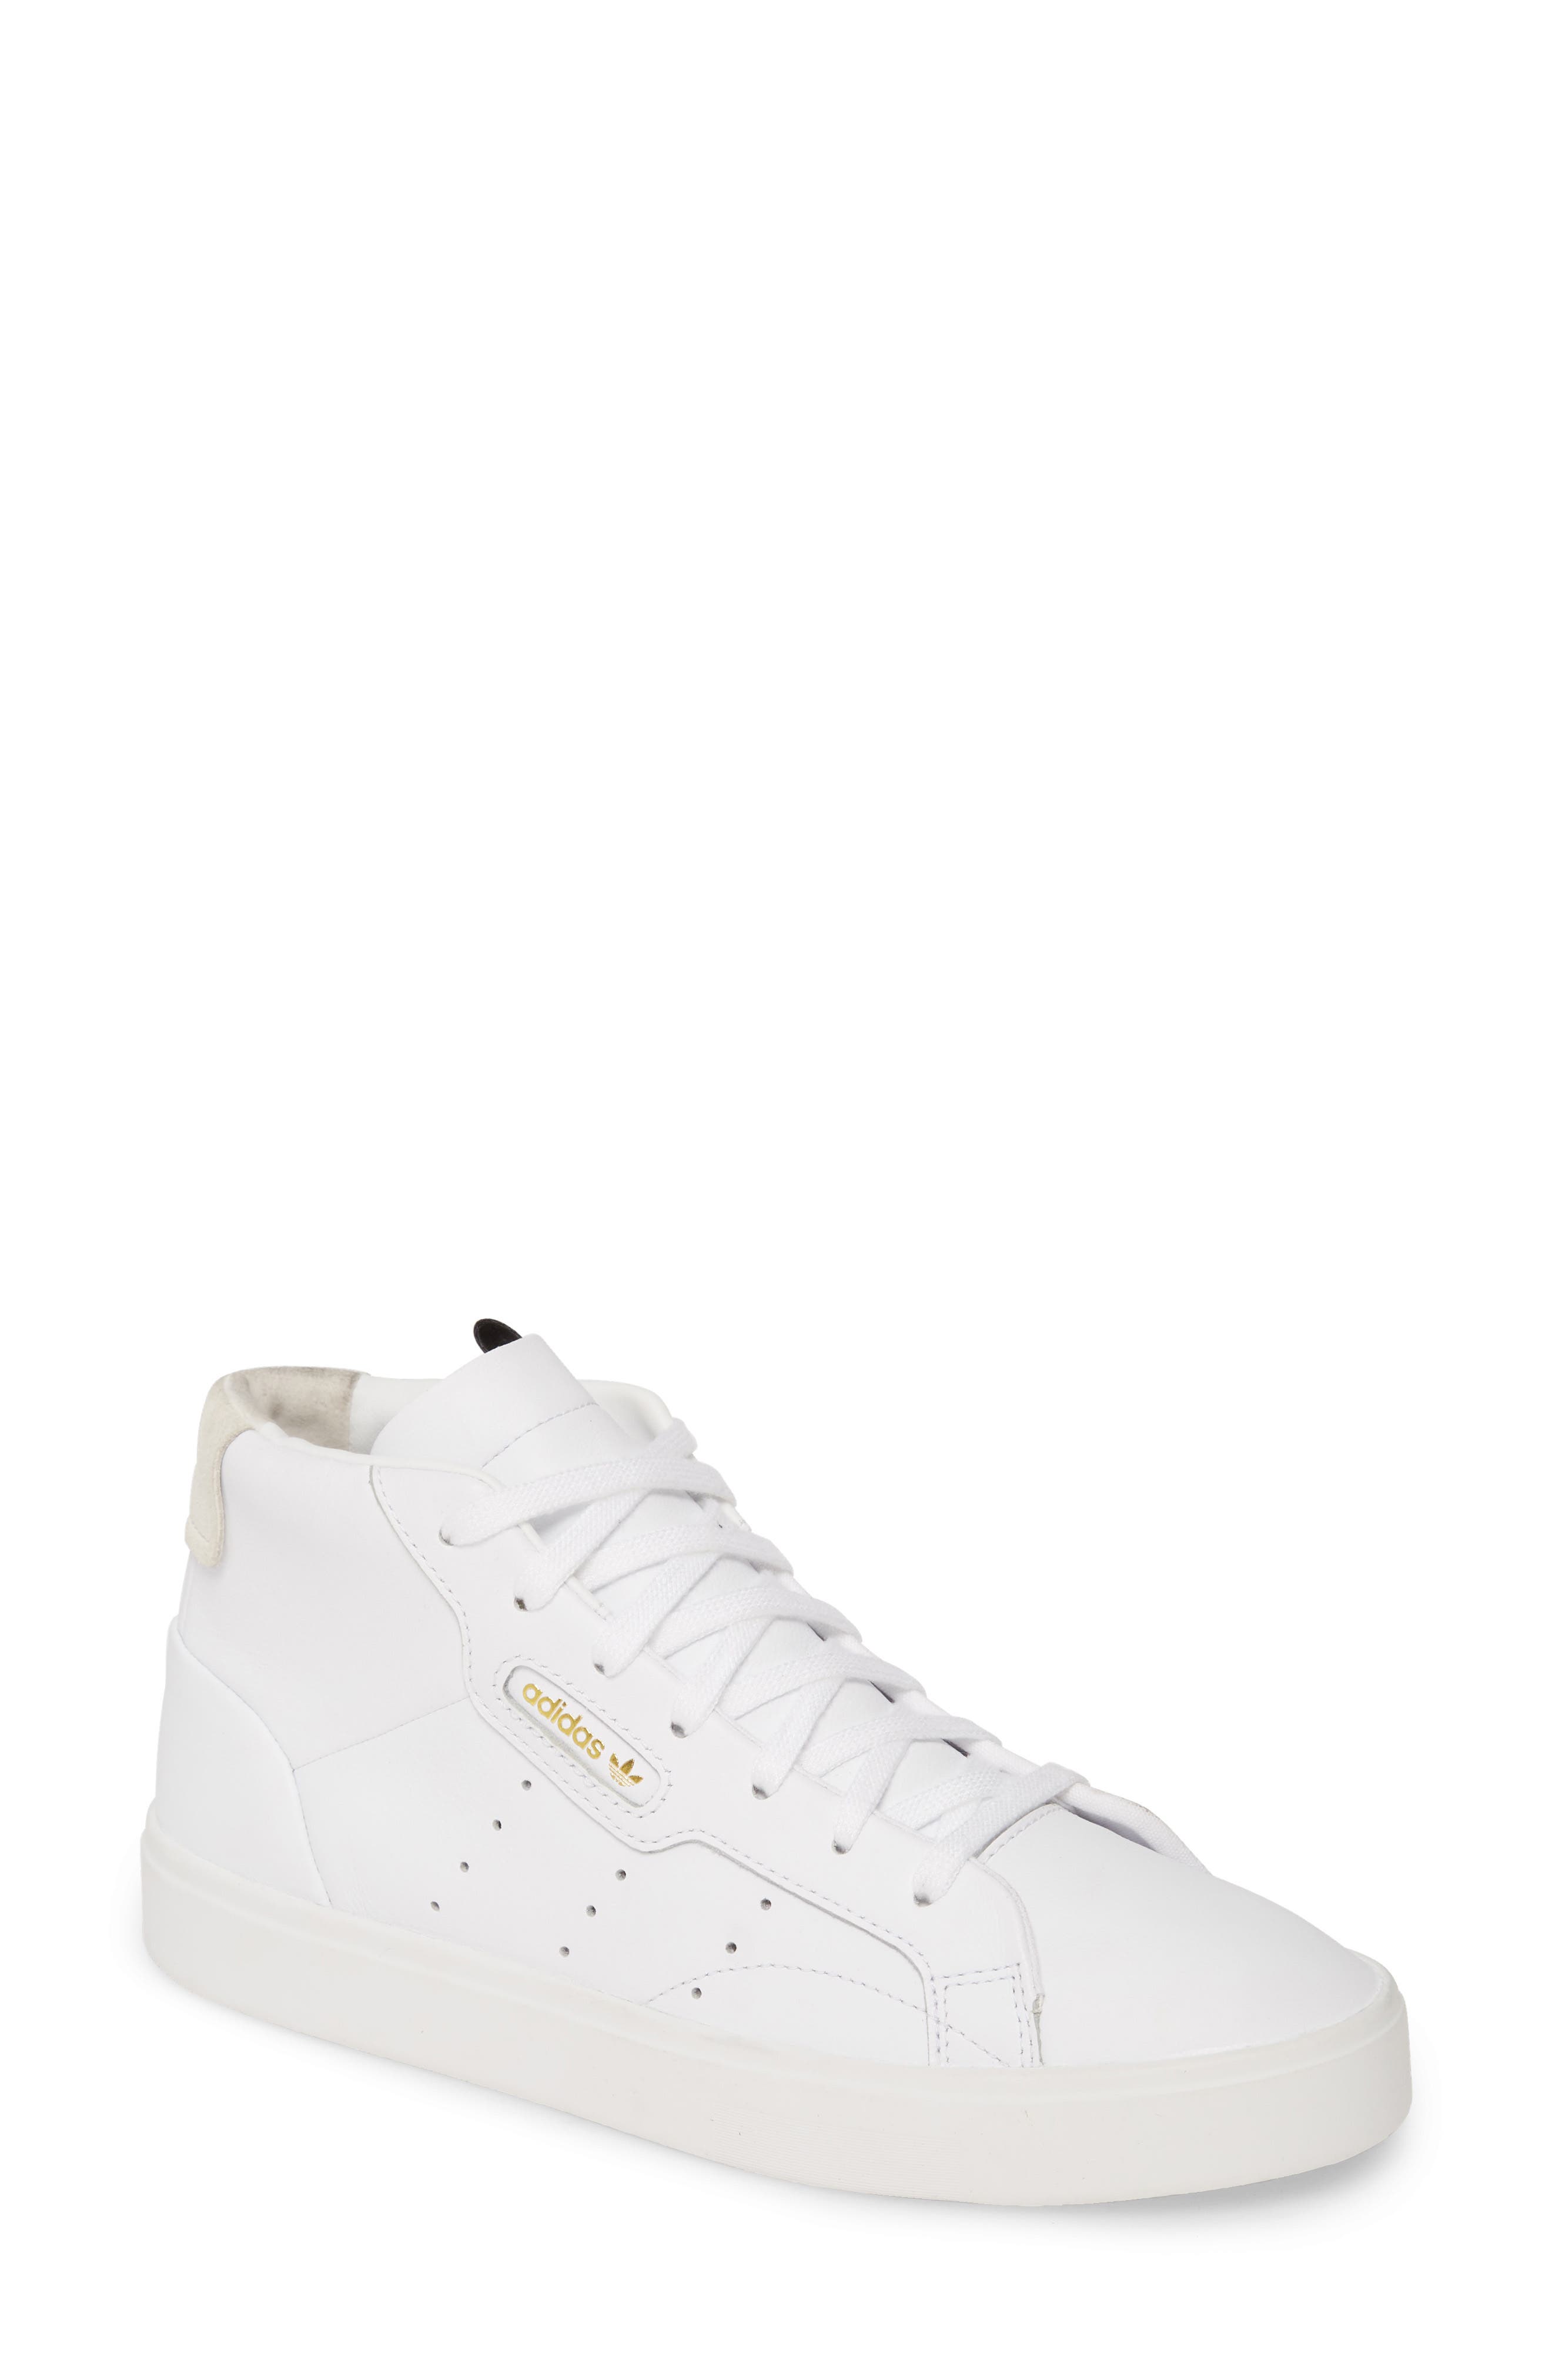 womens adidas shoes under $40